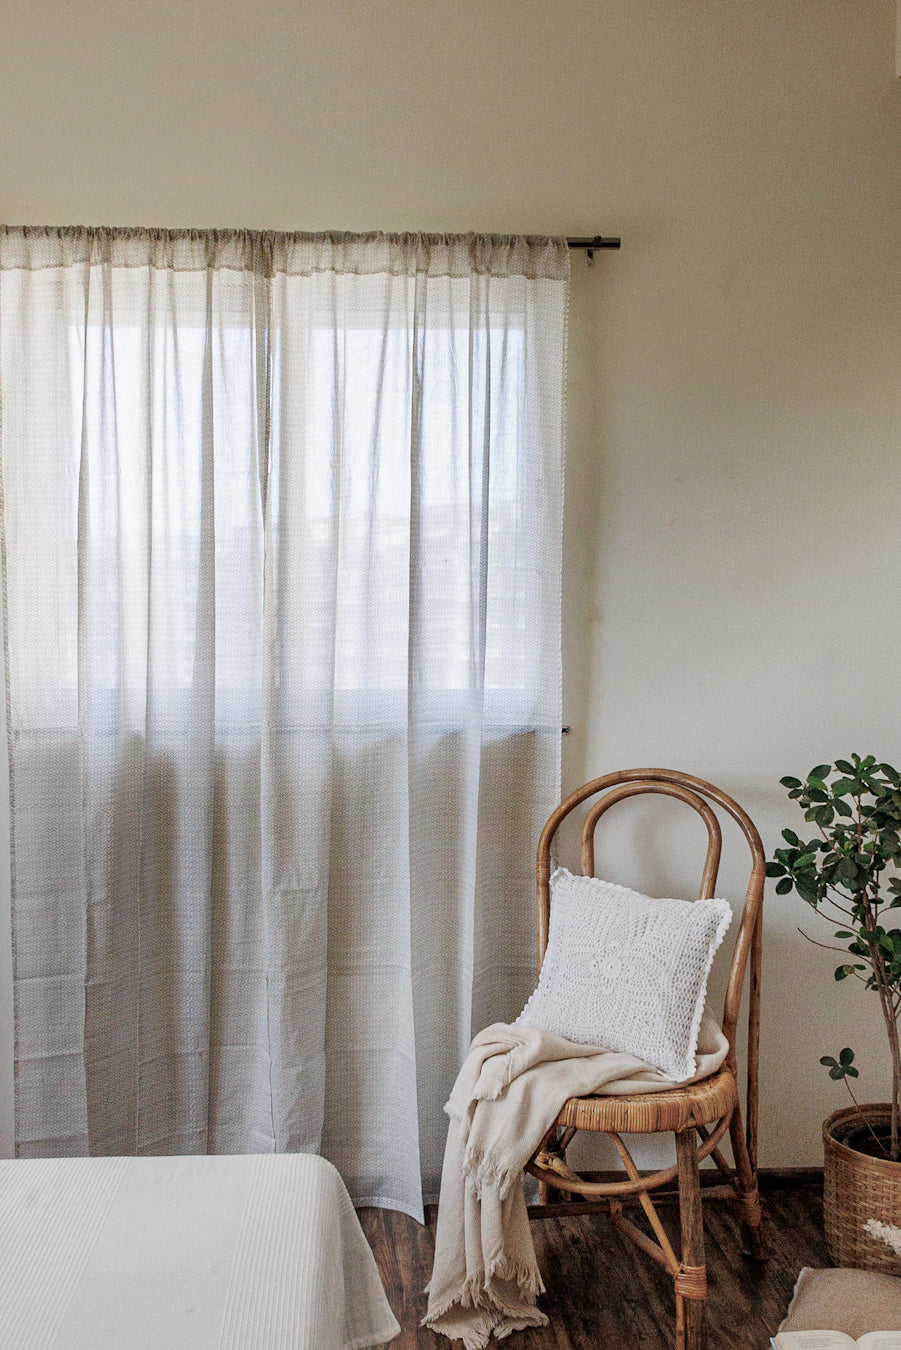 Grey geometric sheer curtain - lightweight sheer curtains - Sold individually